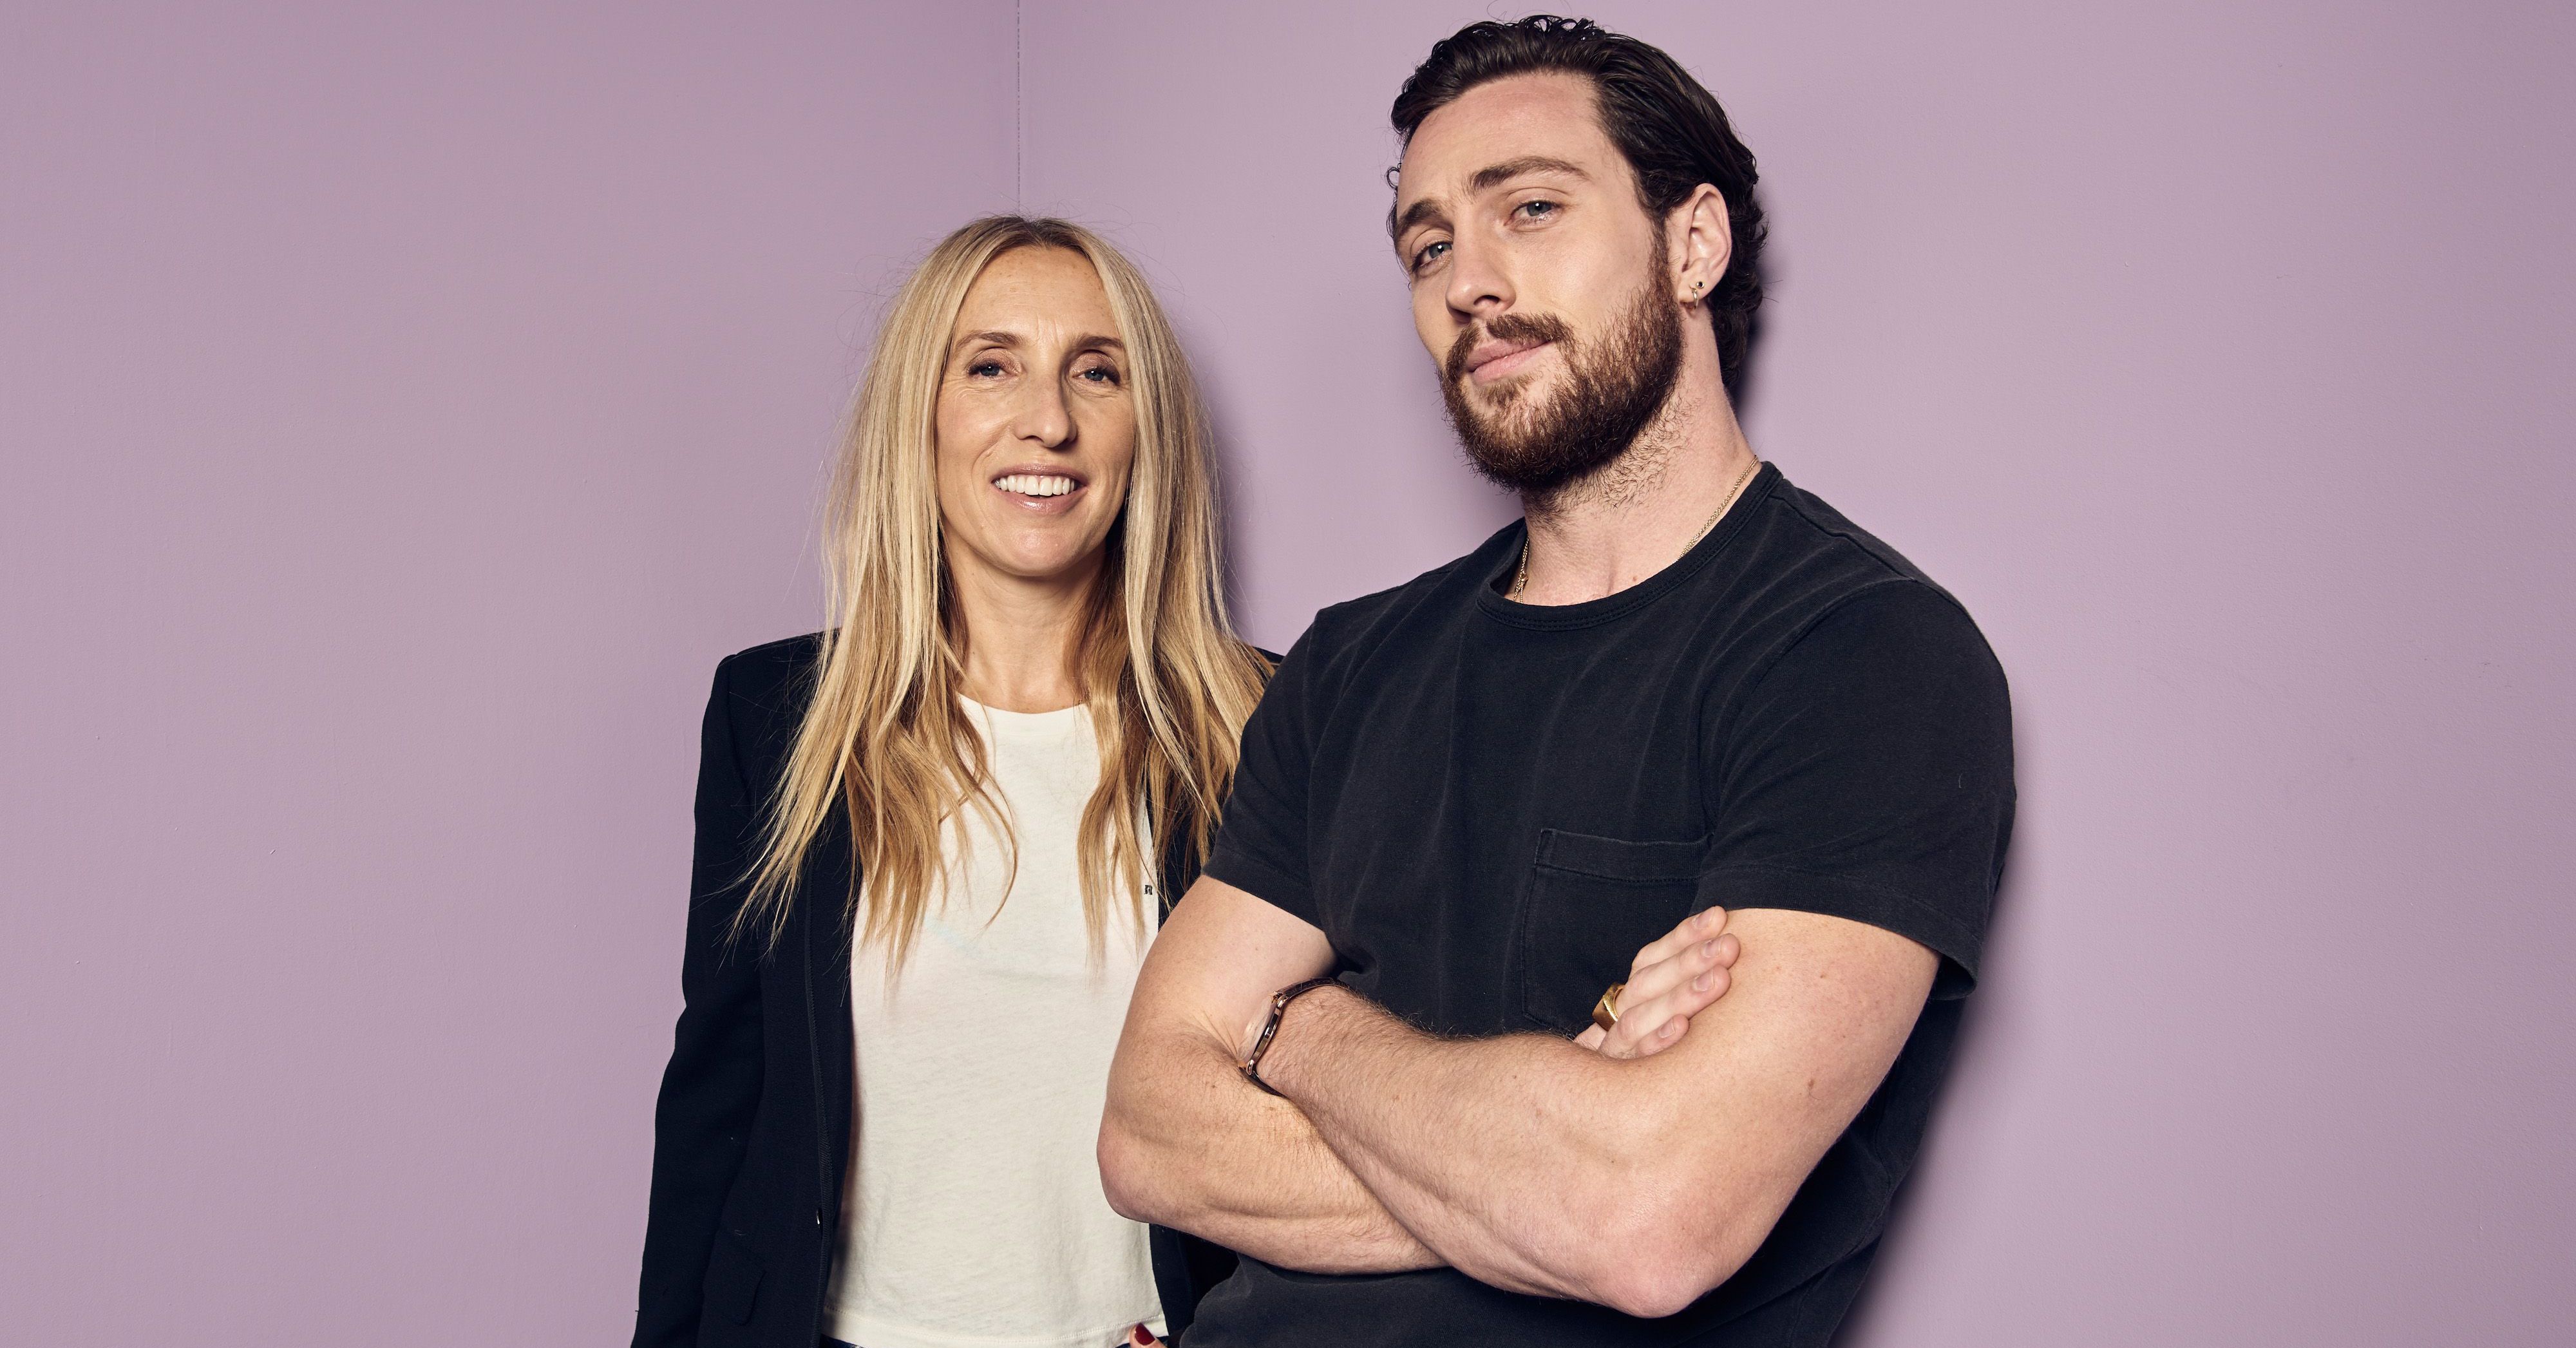 Aaron Taylor-Johnson Reminds Fans on Instagram of His Upcoming Film 'A Million Little Pieces' - The Blast